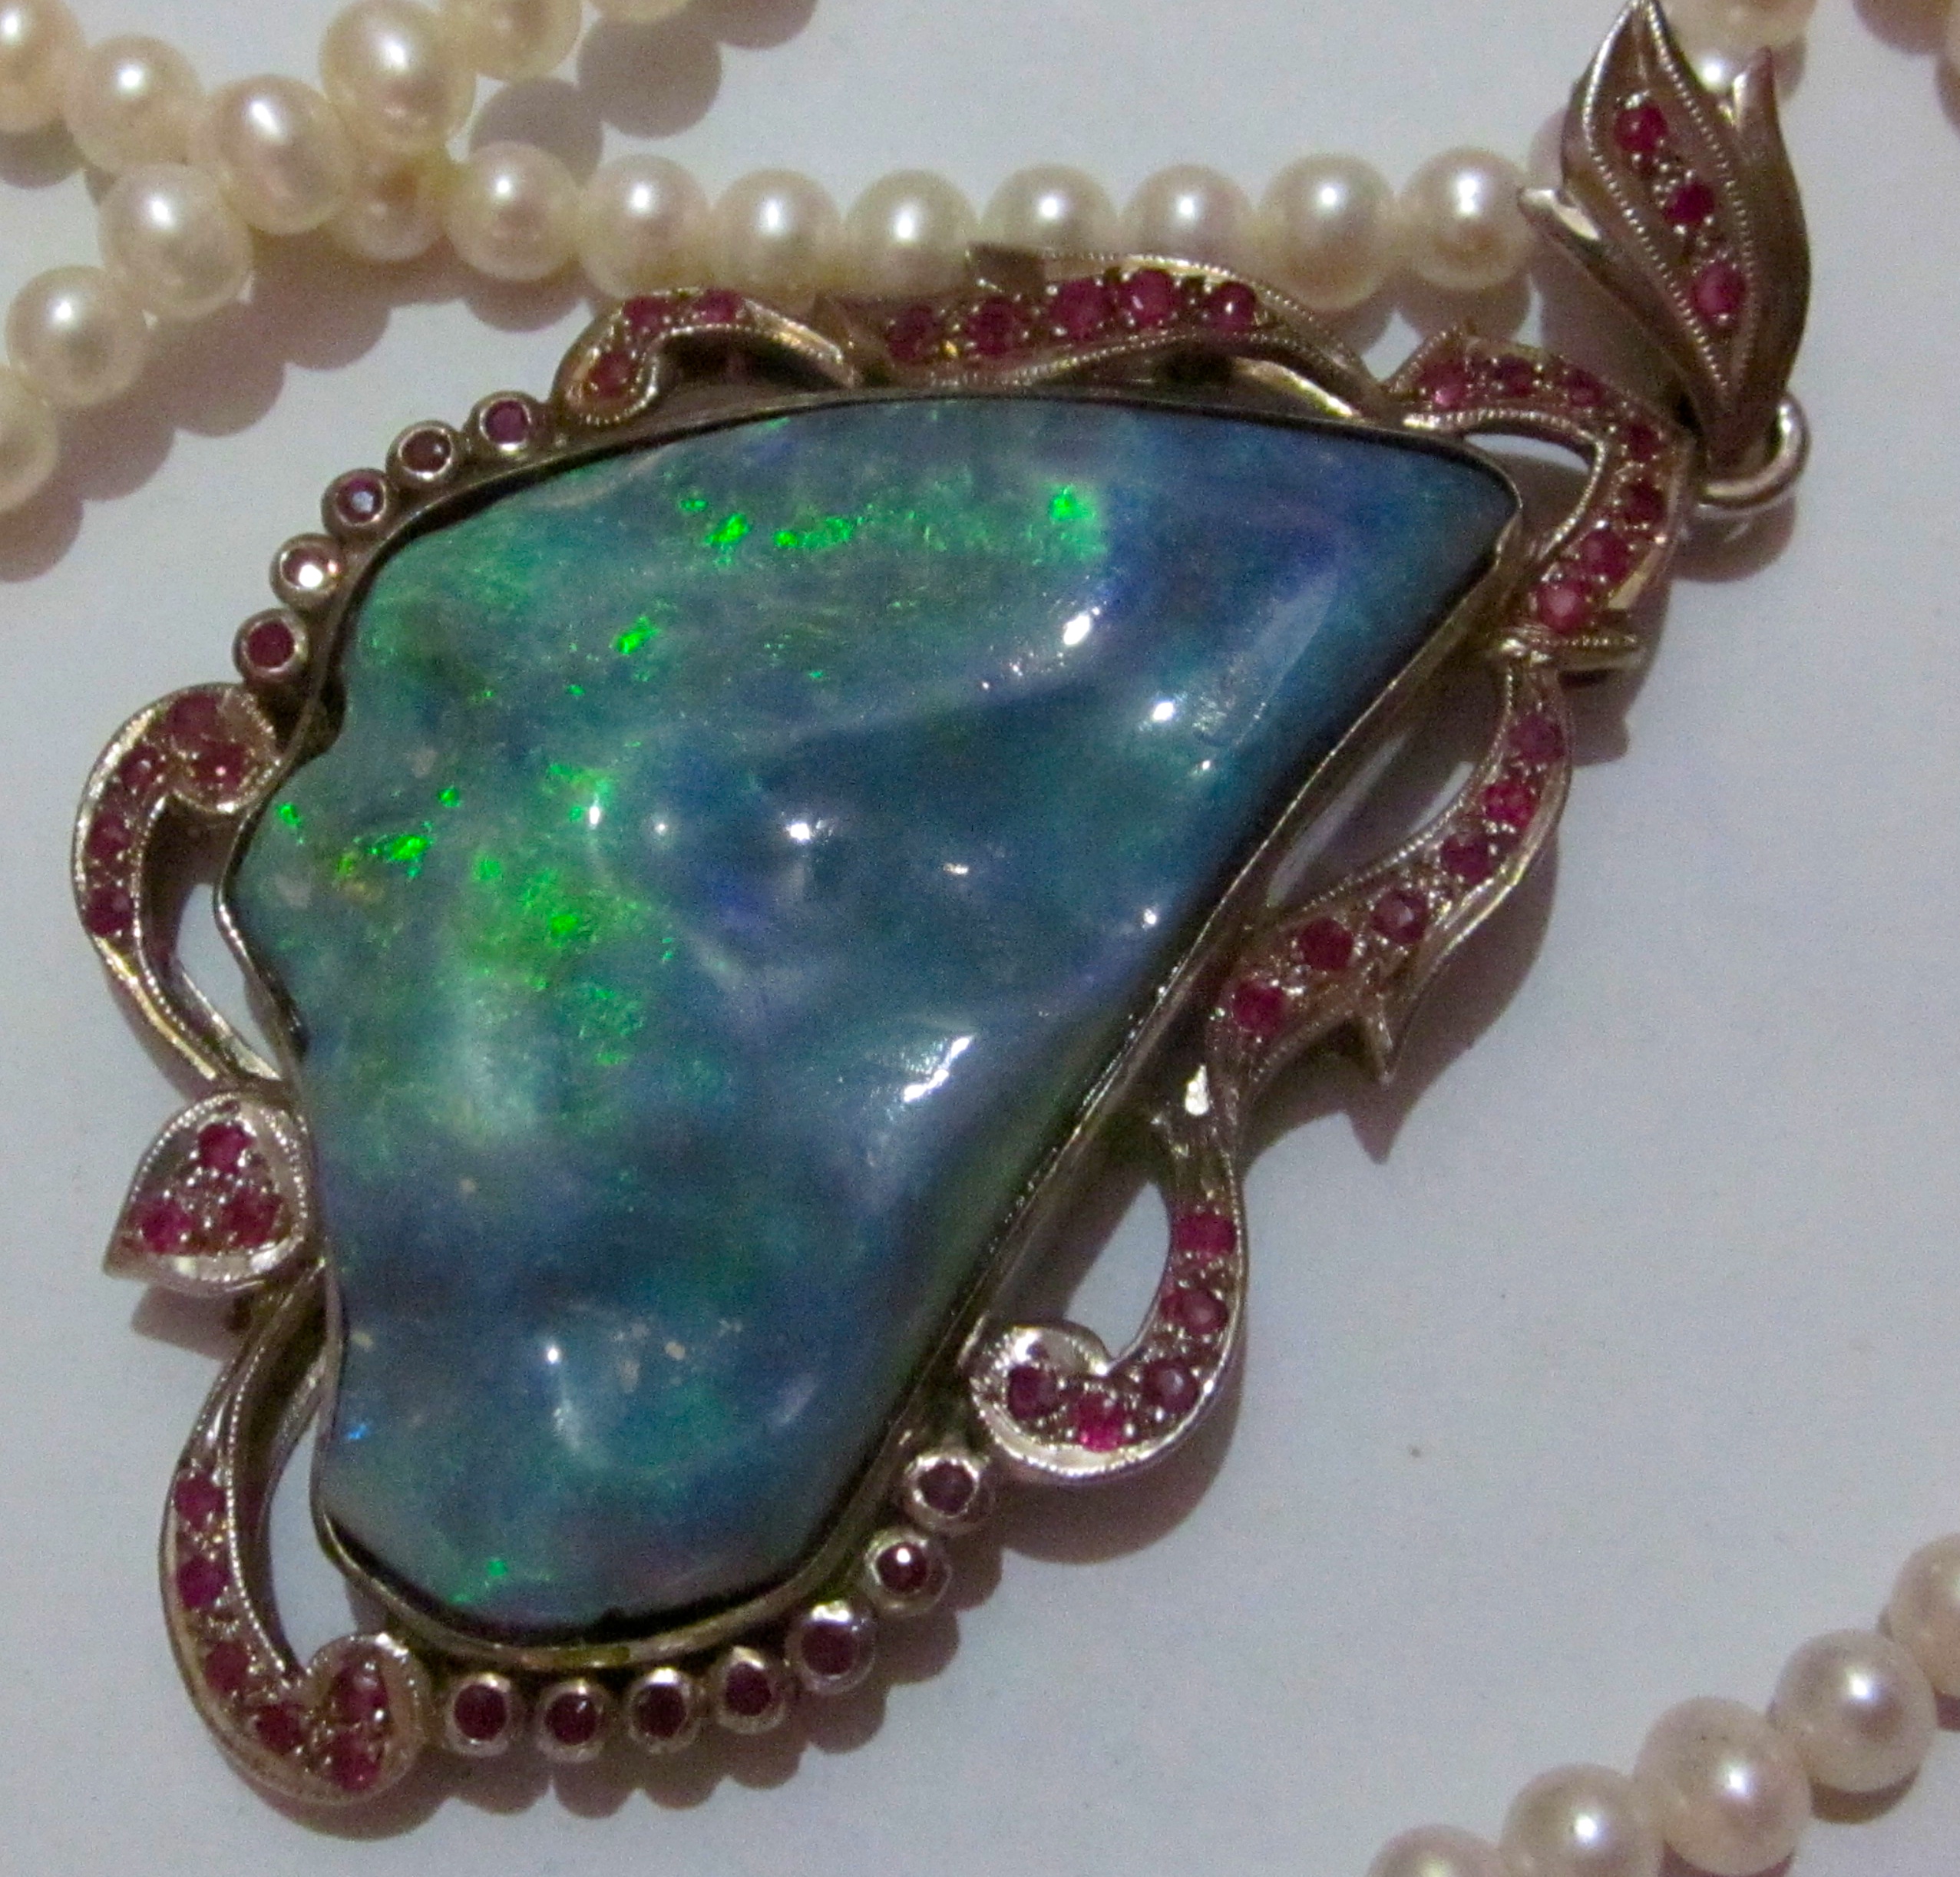 Jewelry stores necklace online,opal necklace,handmade opal necklace.